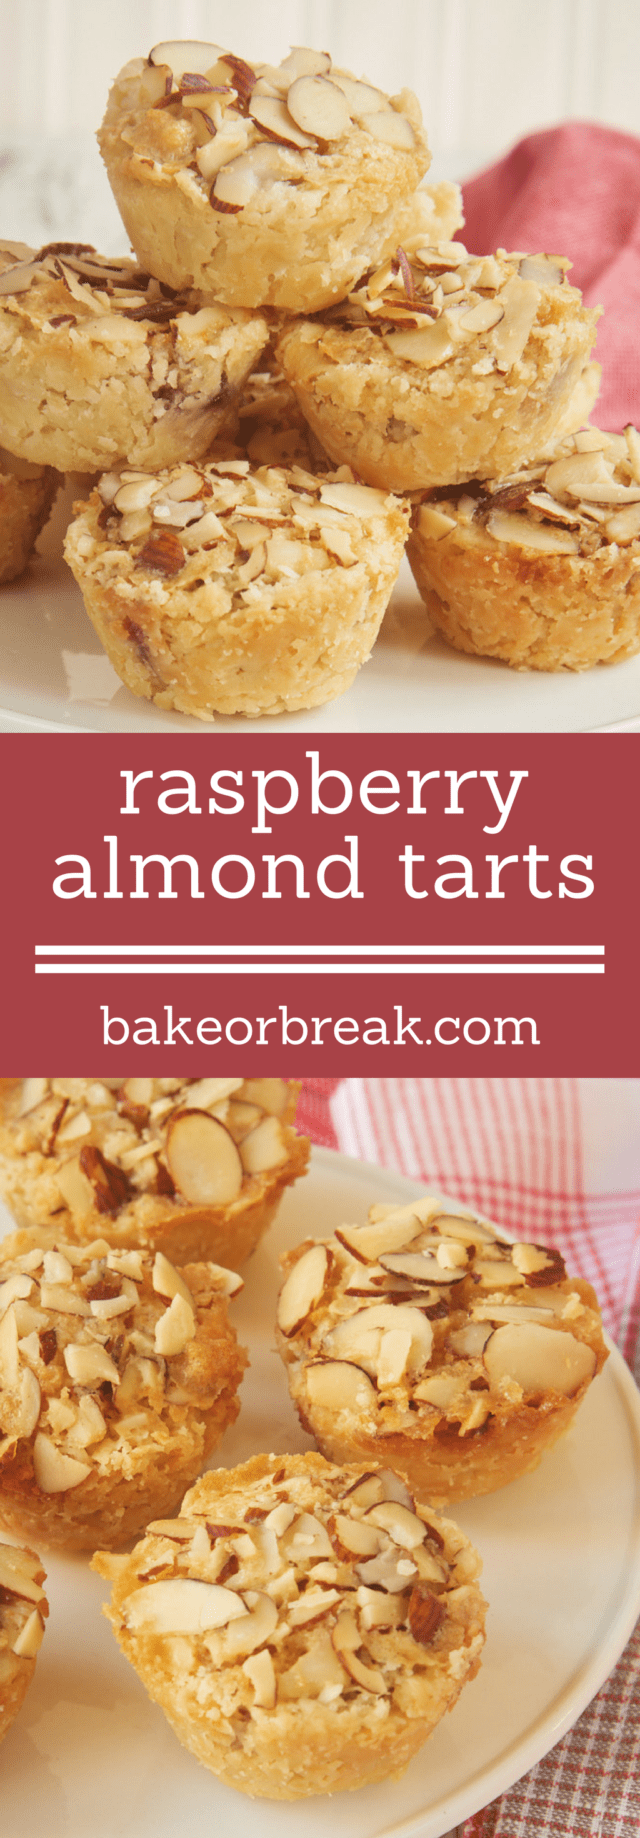 Raspberry almond tarts made with chopped almonds and raspberry preserves.